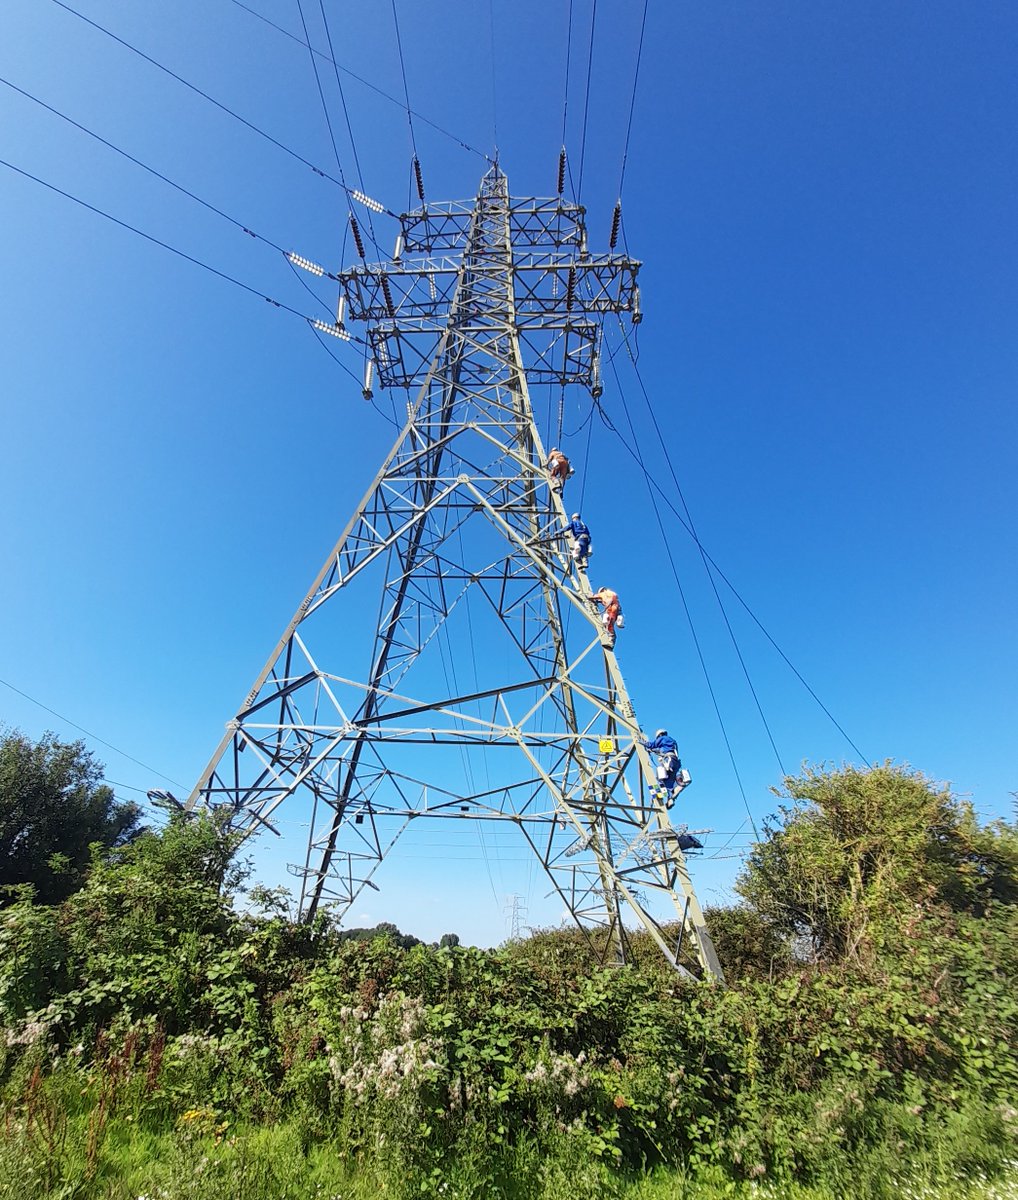 ⚡ UK Power Networks is investing more than £15 million this year in upgrading and maintaining electricity towers across the East and South East of England. 🏗️ The steel towers are responsible for powering around six million homes and businesses. ⛈️ The multi million-pound…